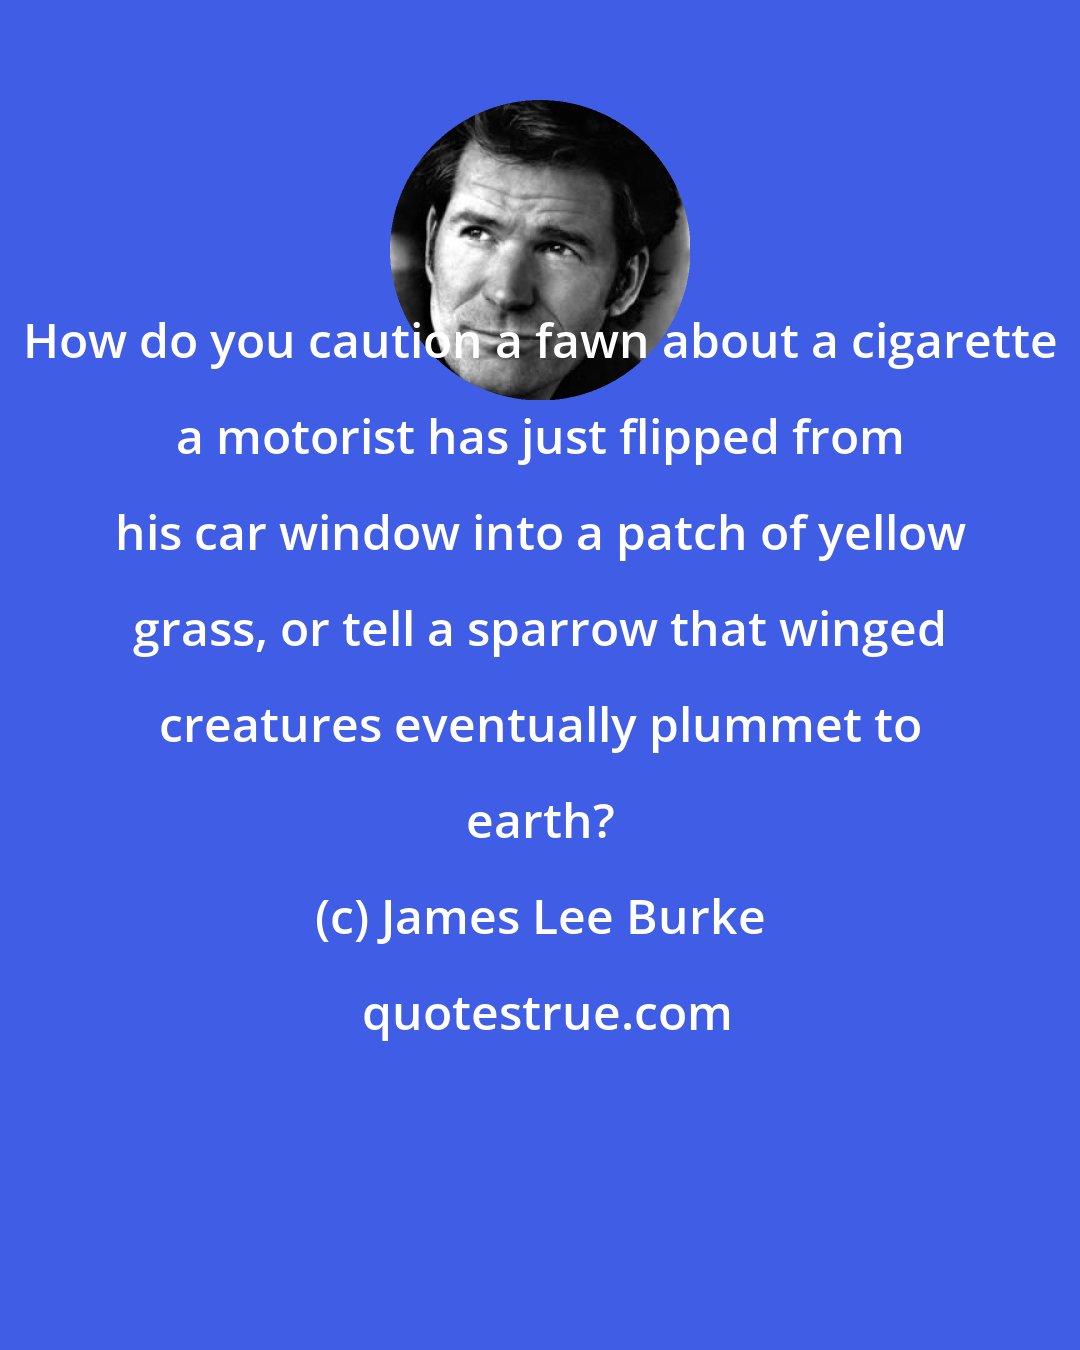 James Lee Burke: How do you caution a fawn about a cigarette a motorist has just flipped from his car window into a patch of yellow grass, or tell a sparrow that winged creatures eventually plummet to earth?